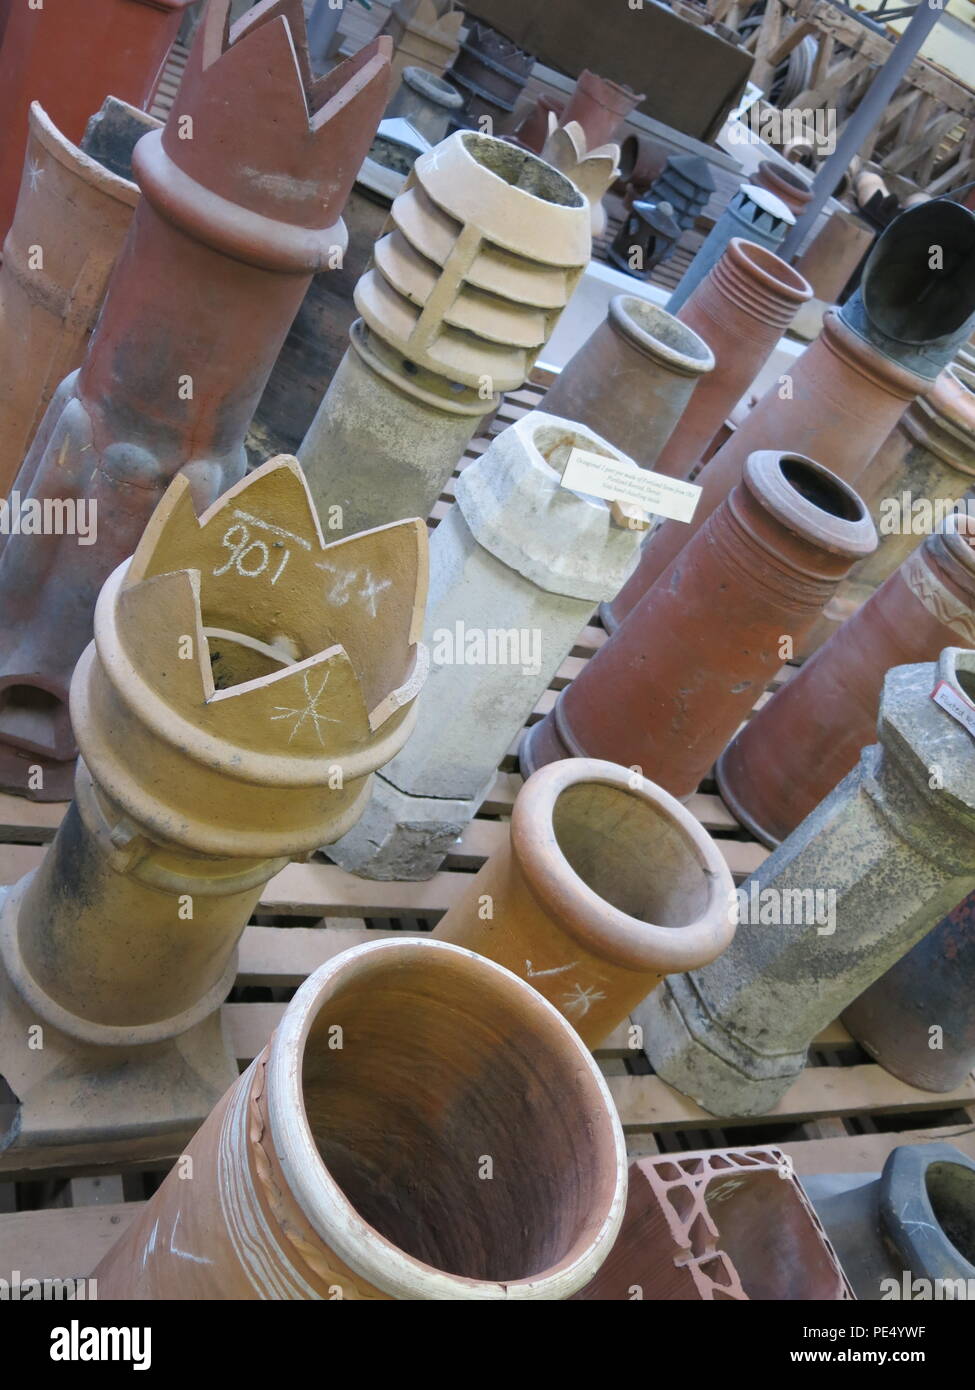 Bursledon Brickworks Industrial Museum is Britain's only steam driven brickworks; photo shows the different chimney pots and ridge tiles produced Stock Photo